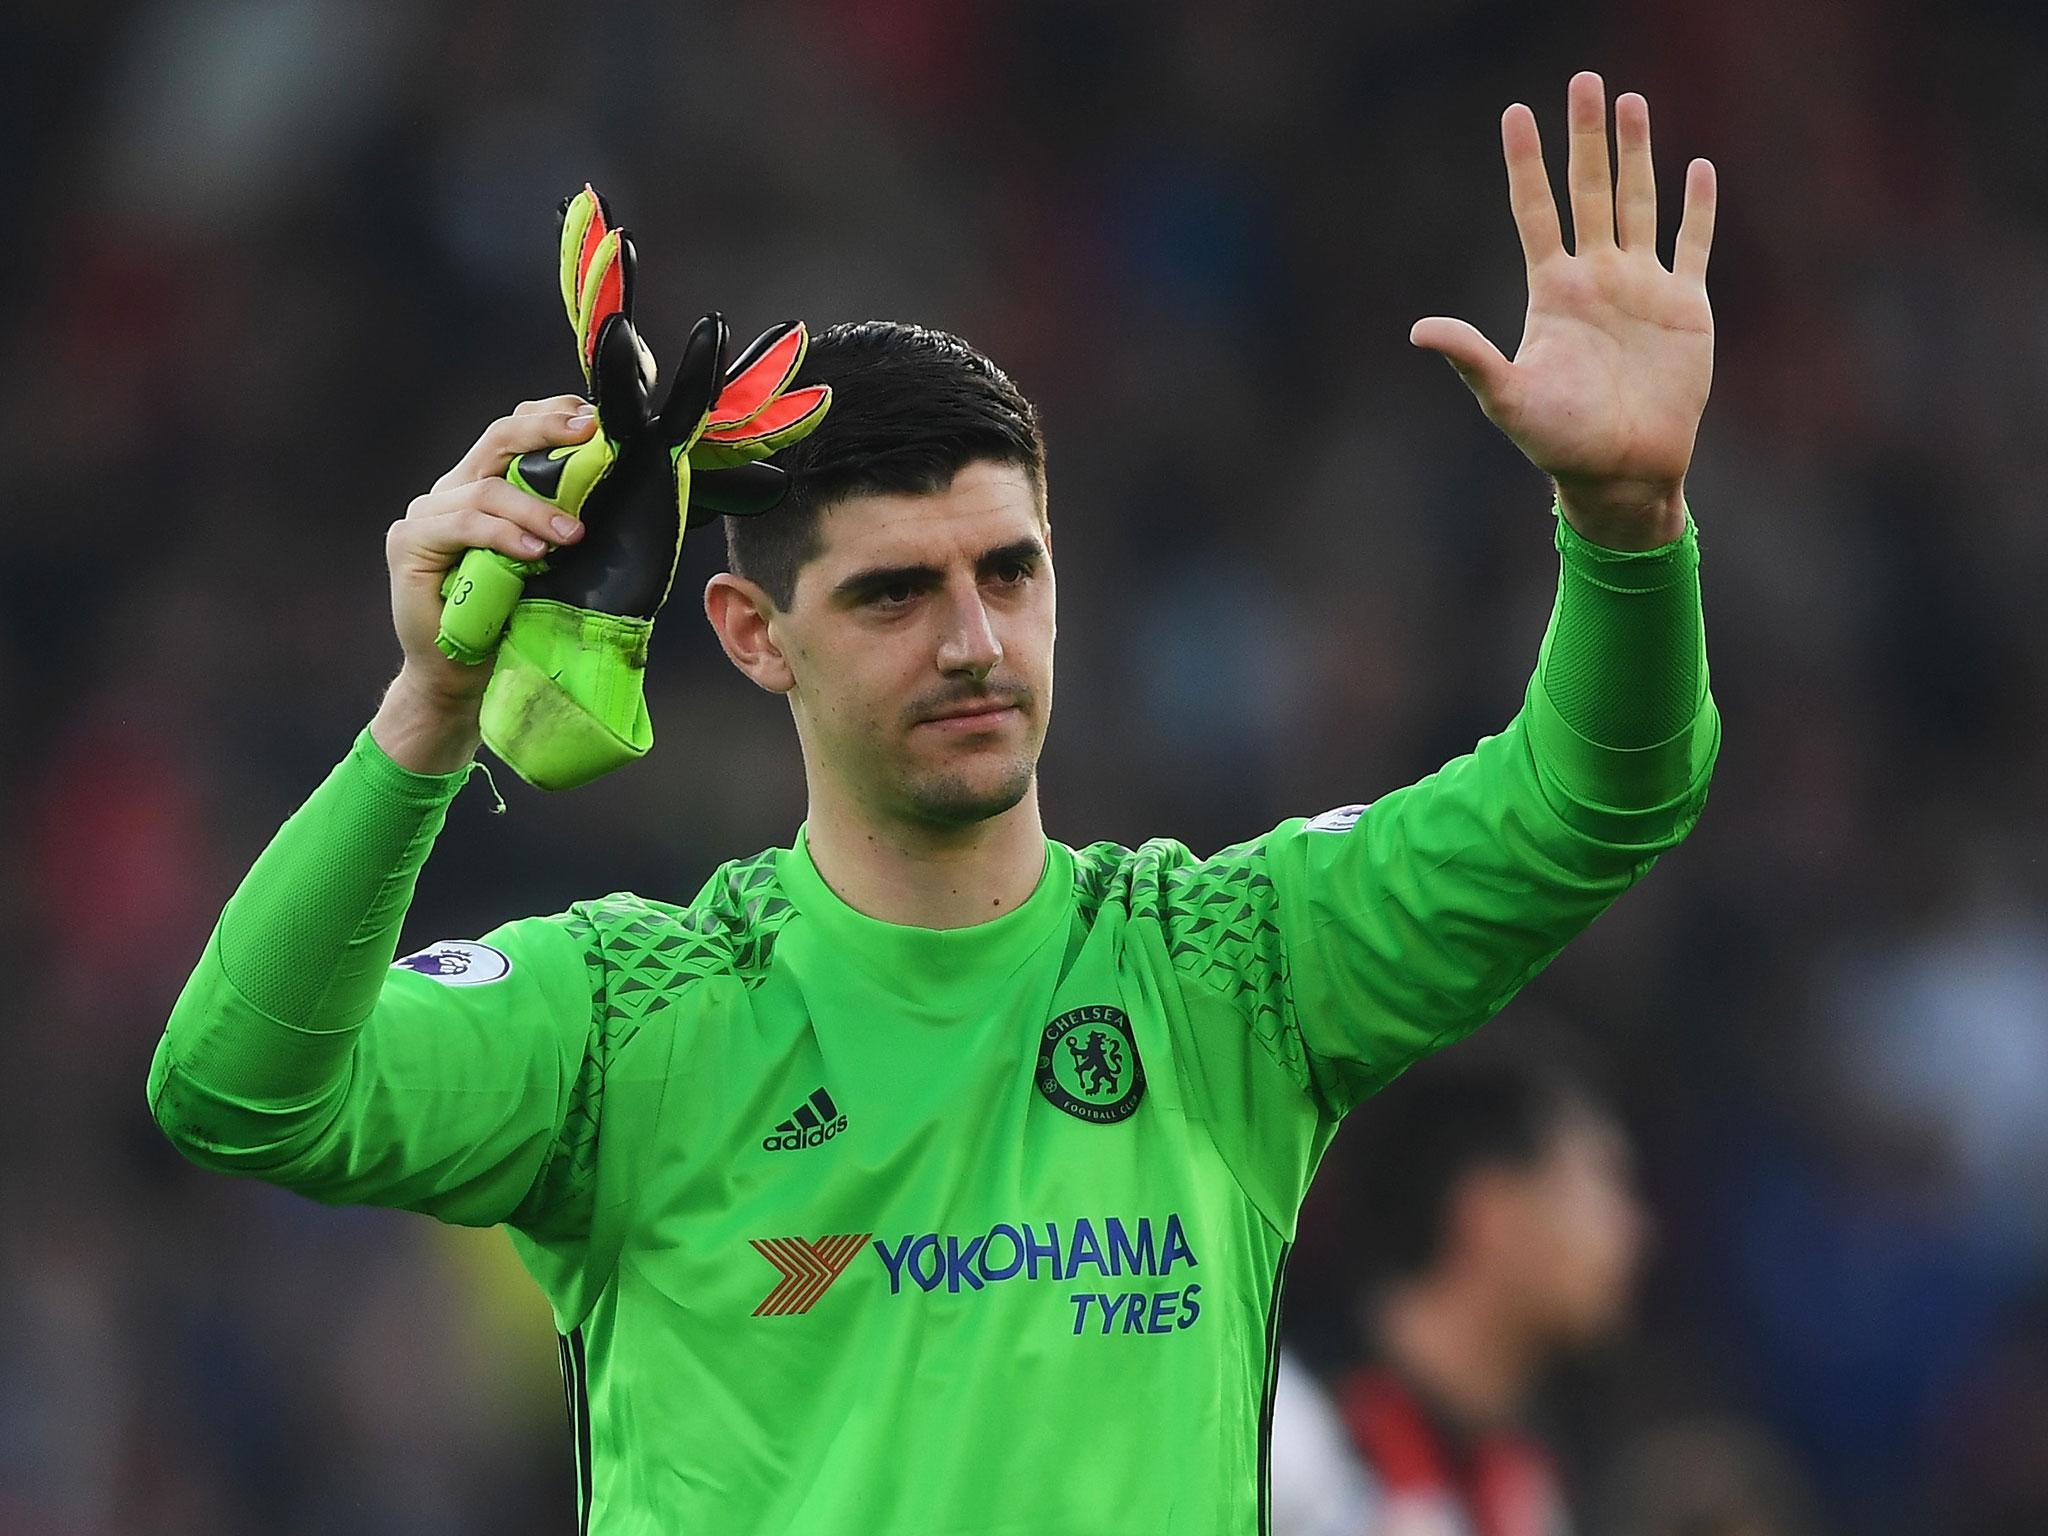 Thibaut Courtois will miss the game at Old Trafford